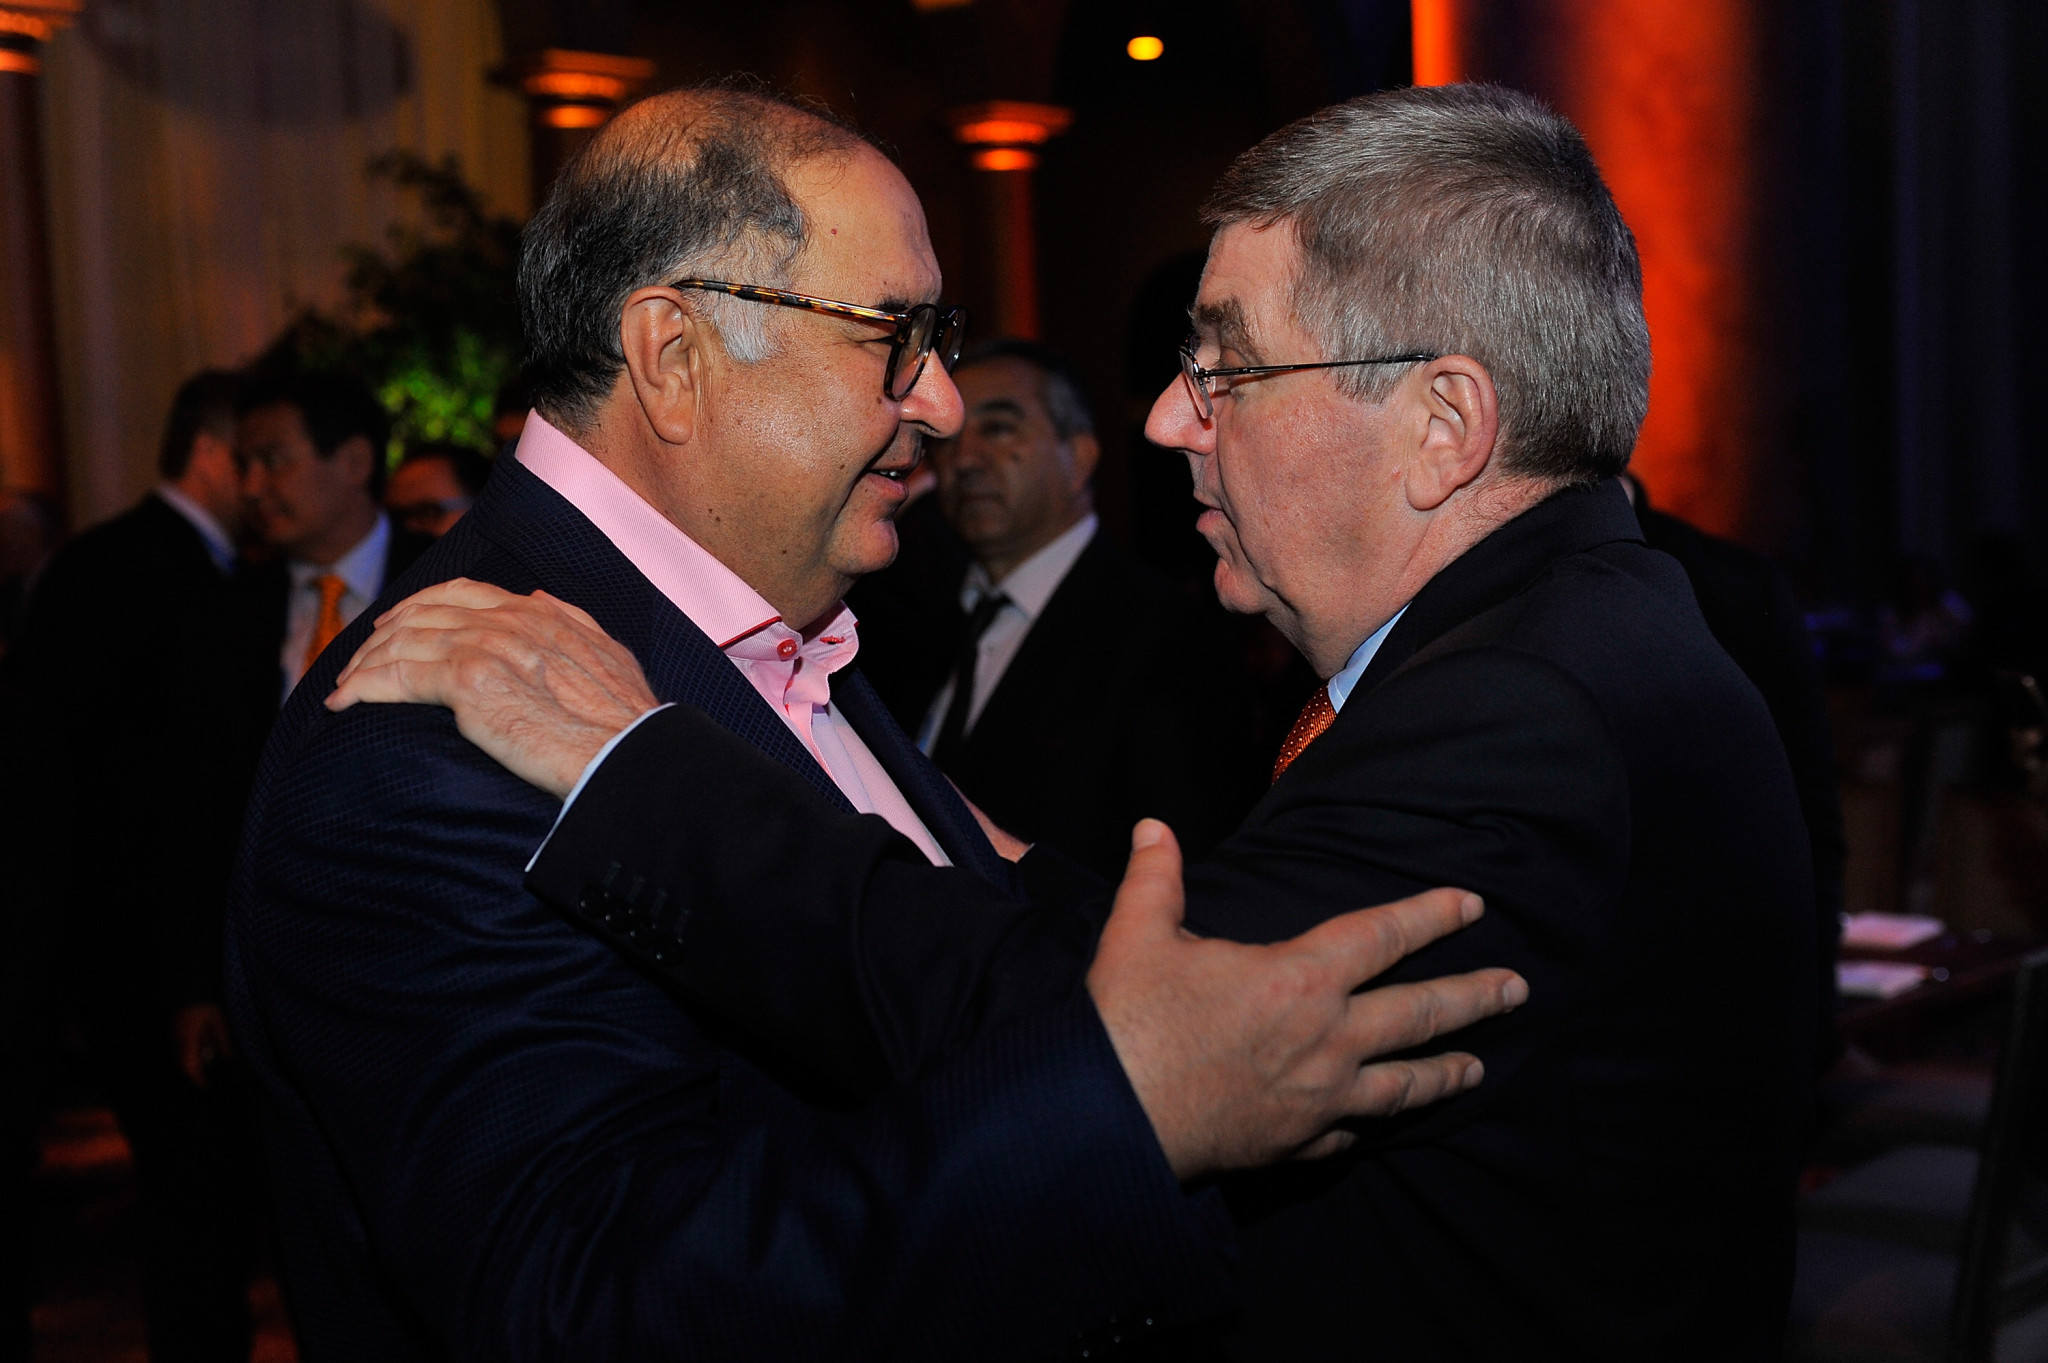 Alisher Usmanov, left, pictured with IOC President Thomas Bach ©Getty Images